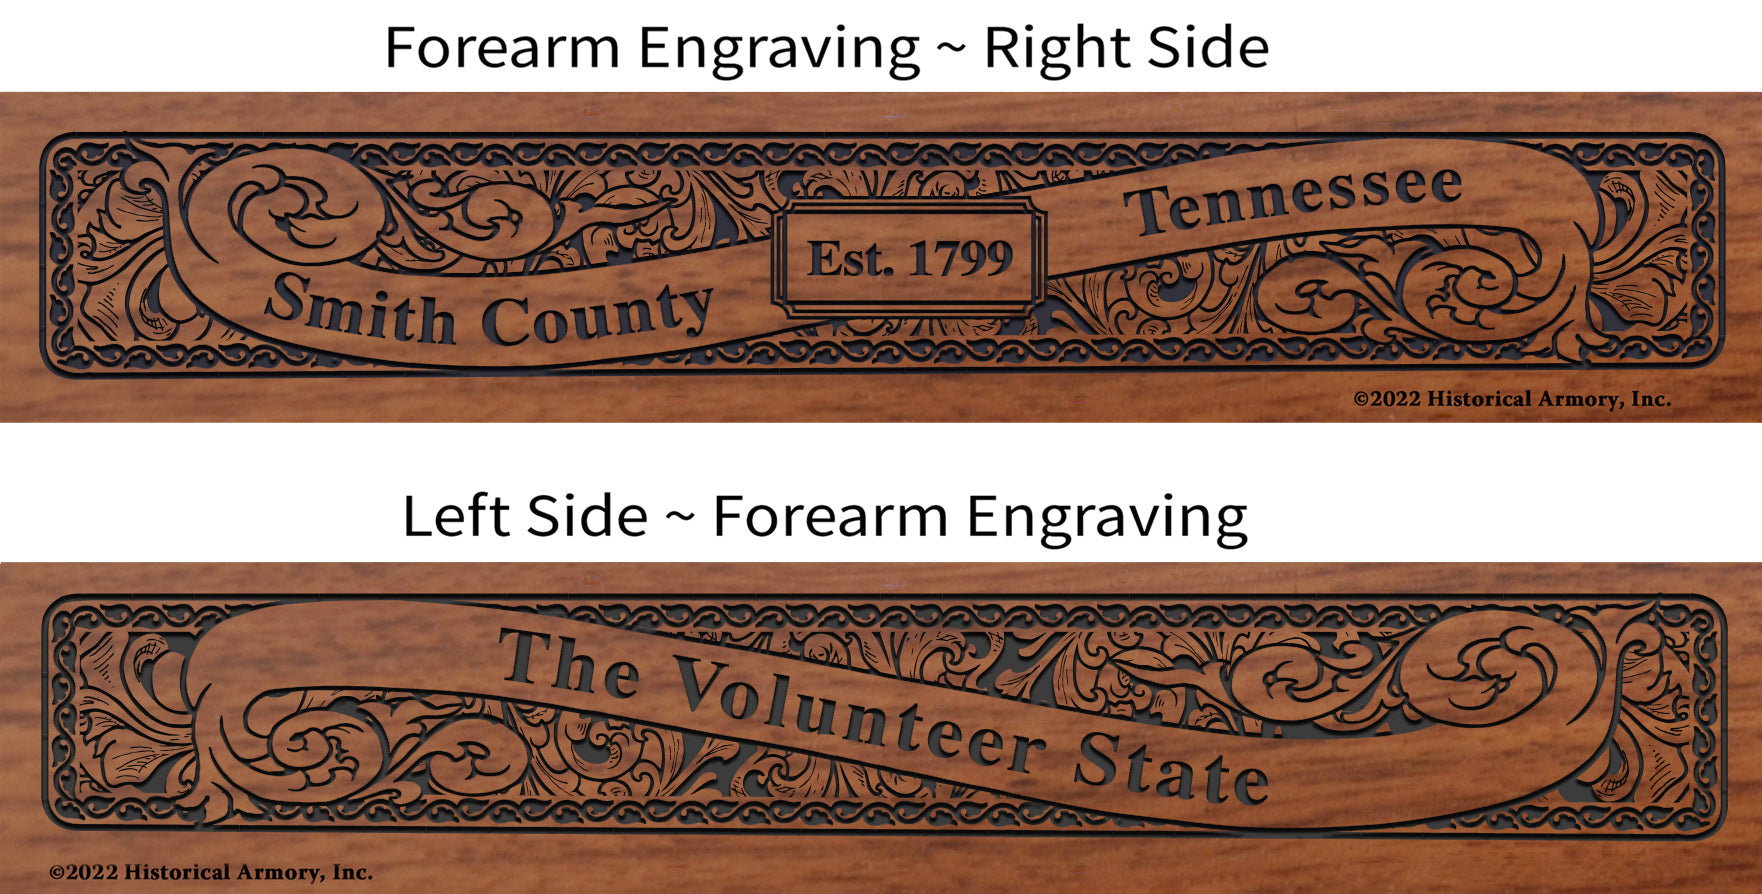 Smith County Tennessee Engraved Rifle Forearm